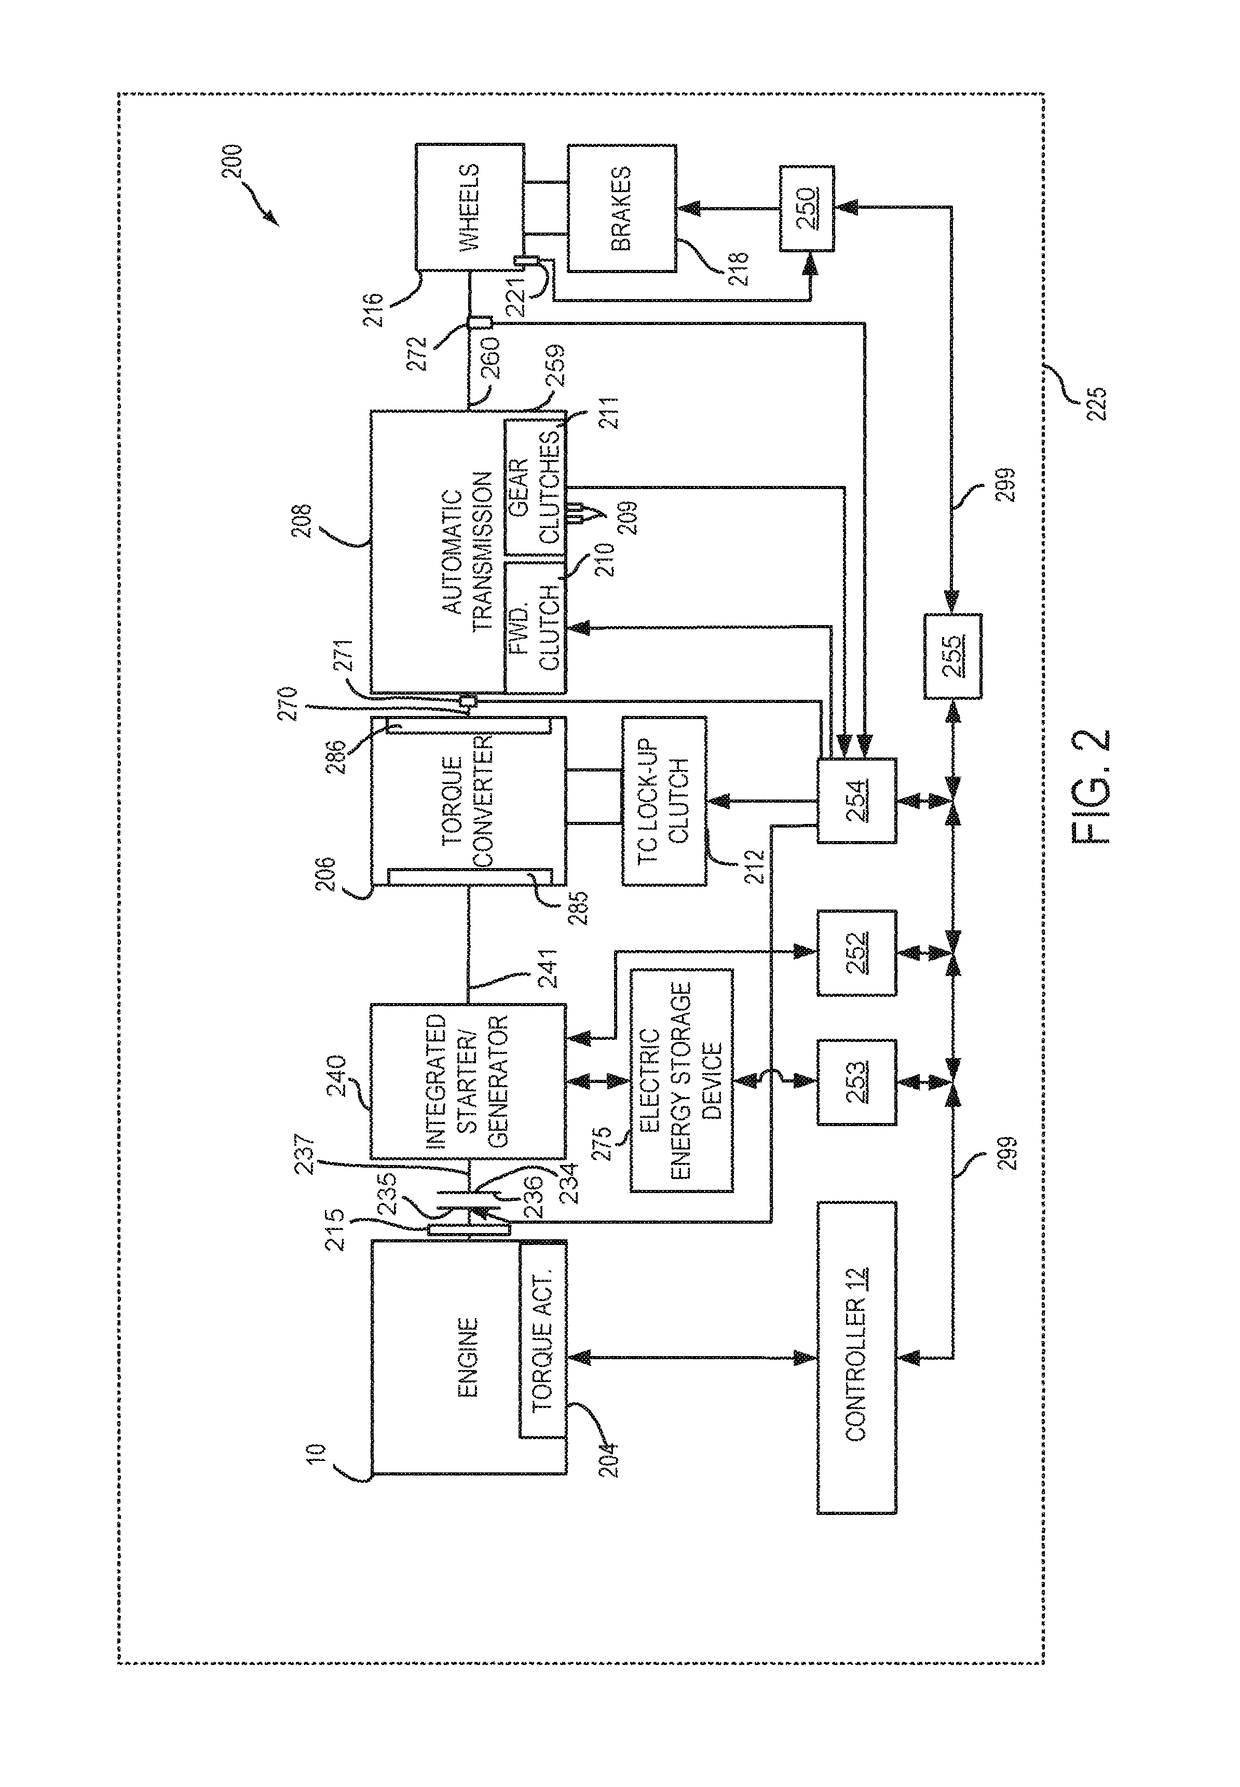 Methods and system for improving efficiency of a hybrid vehicle